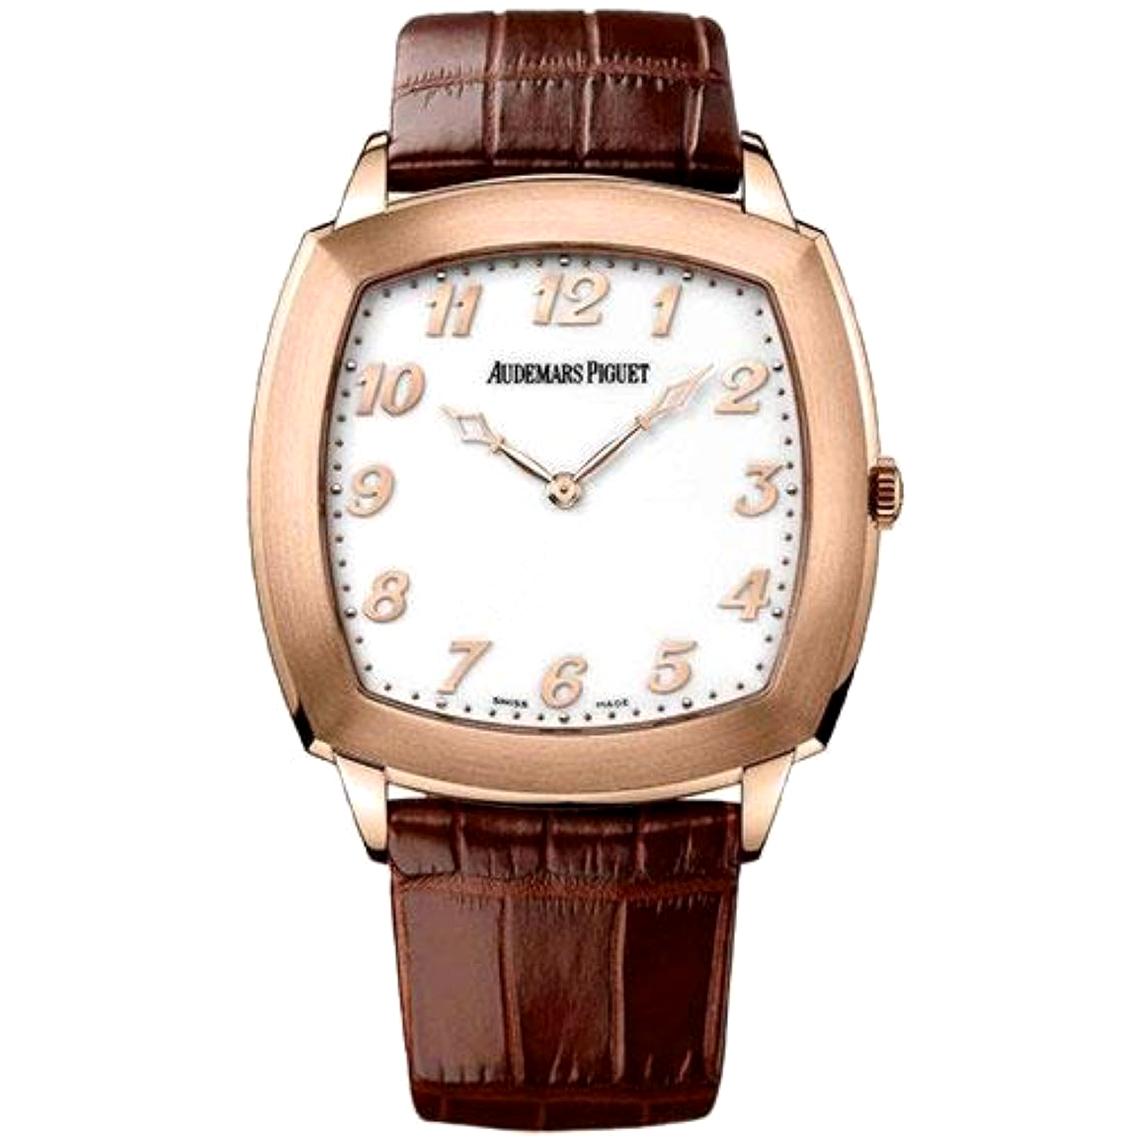 Audemars Piguet Tradition Rose Gold Watch-15334OR.OO.A092CR.01 For Sale